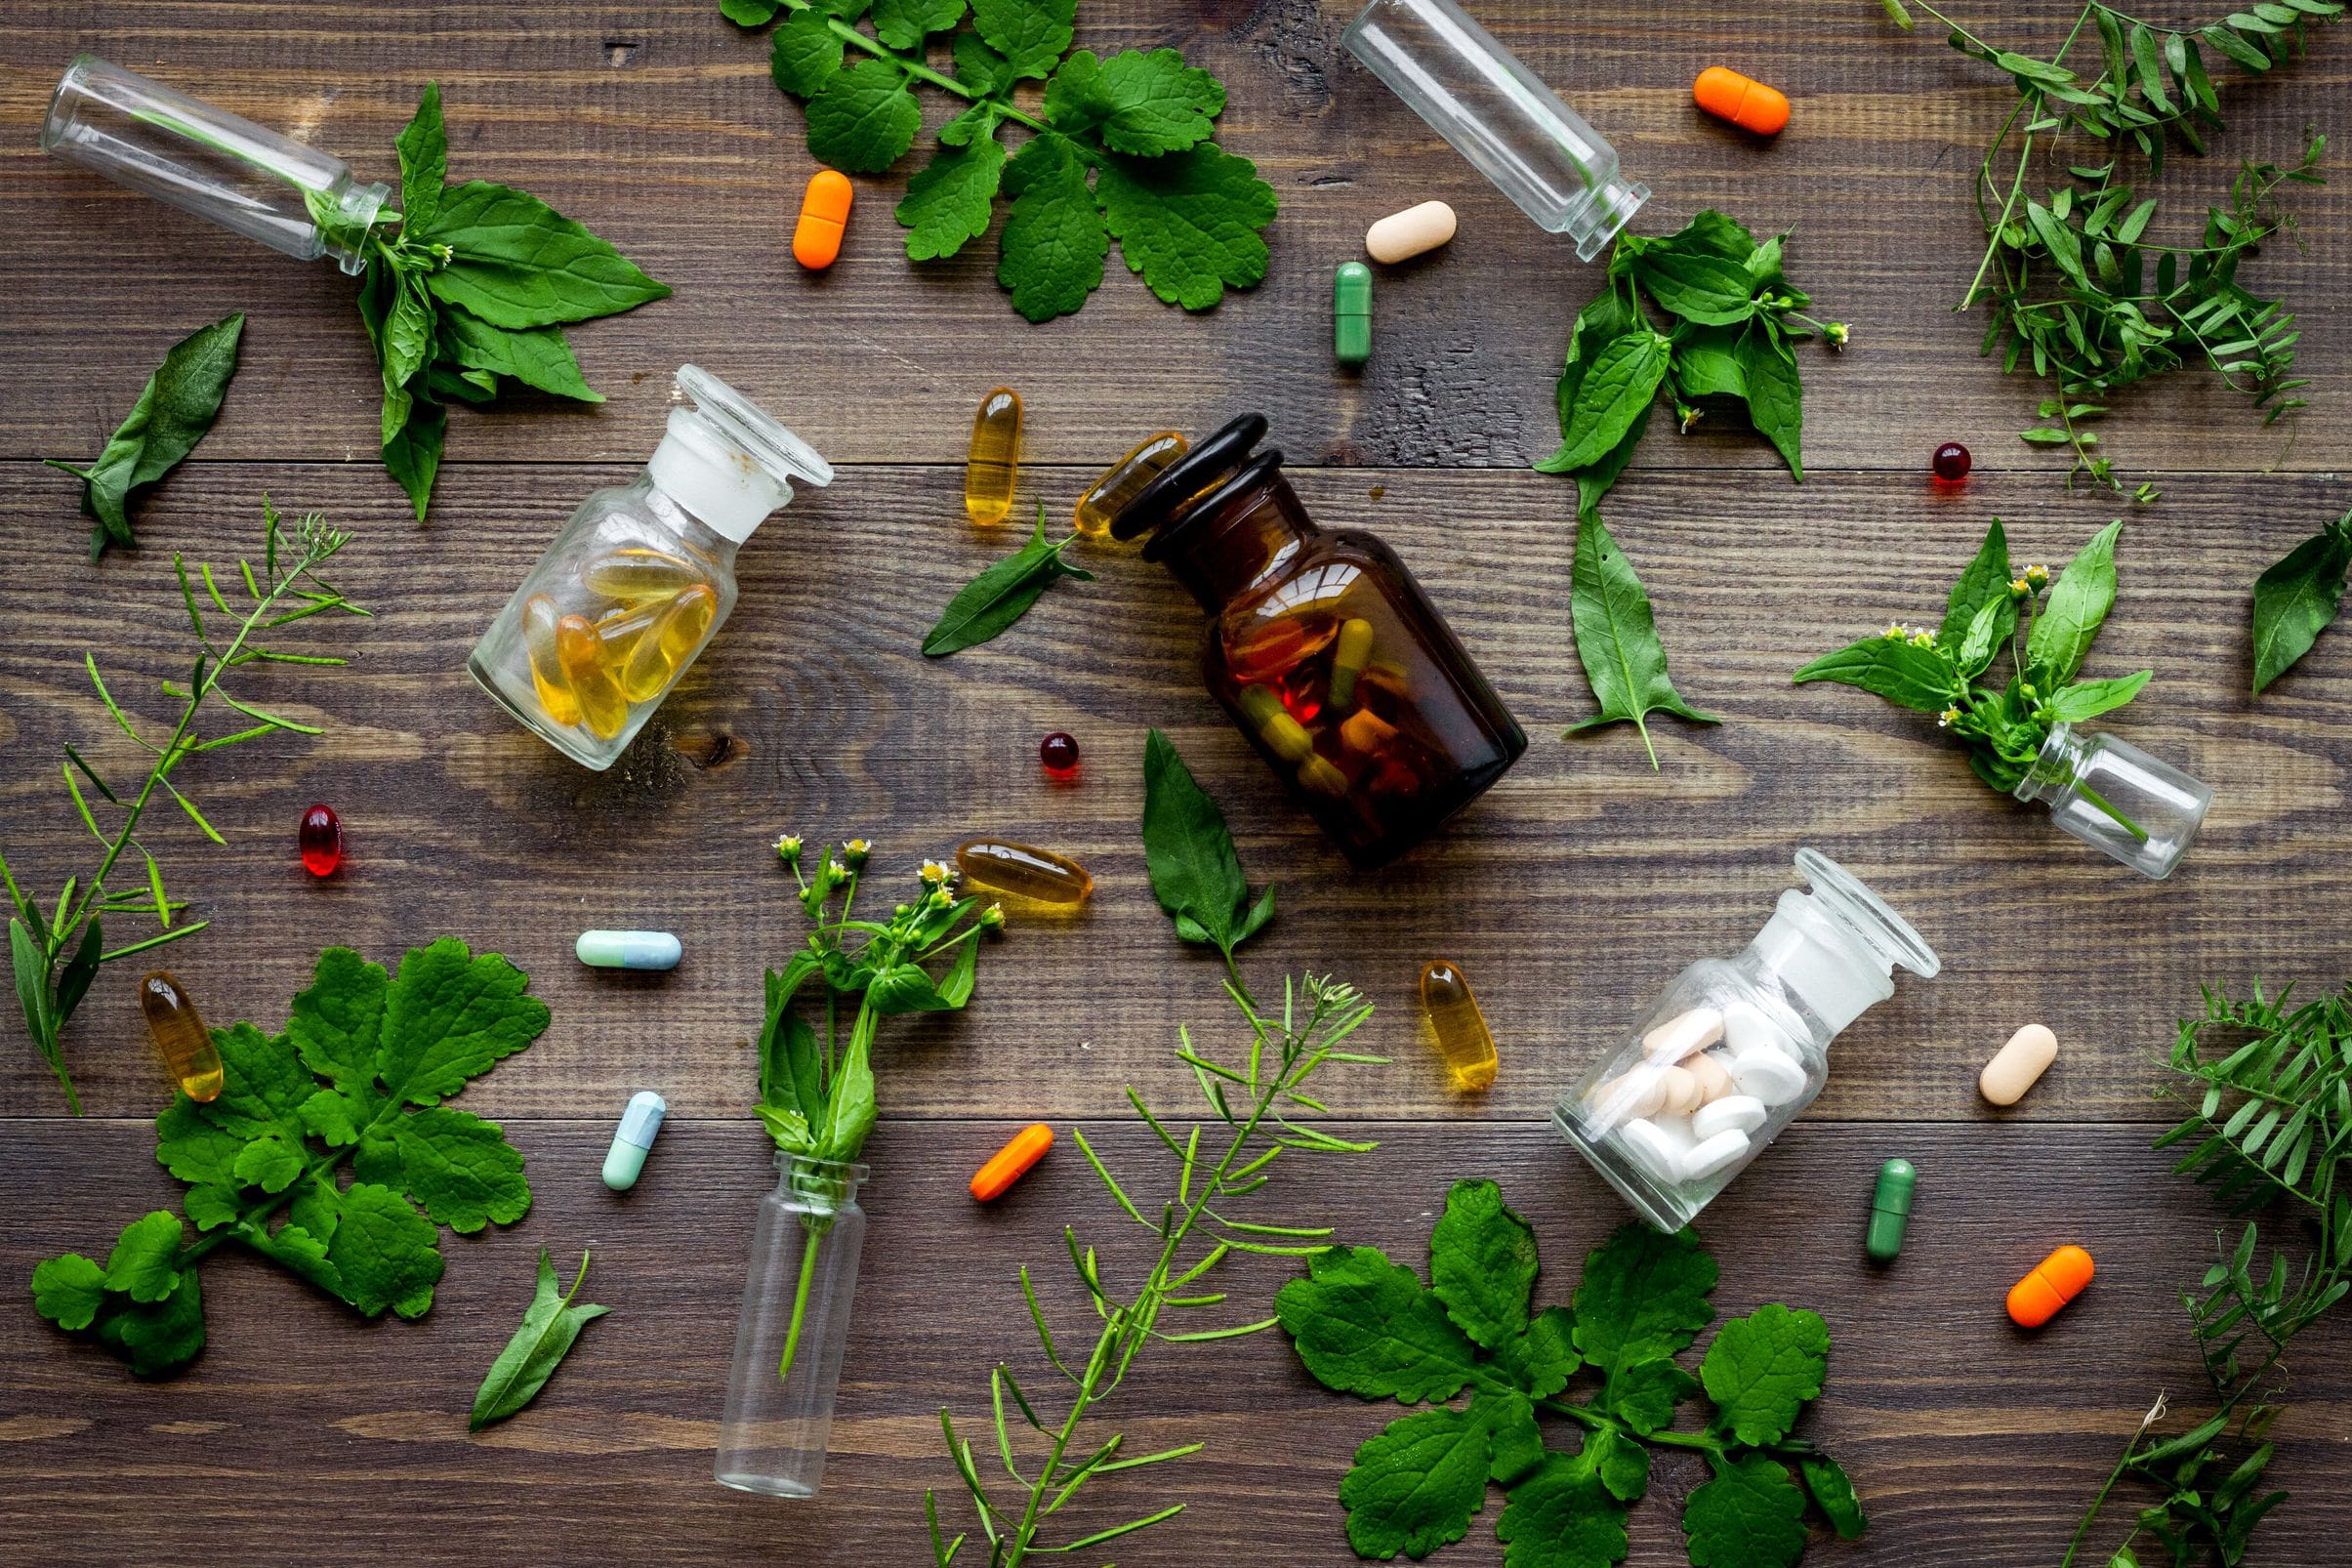 Colds, flu and complementary medicines